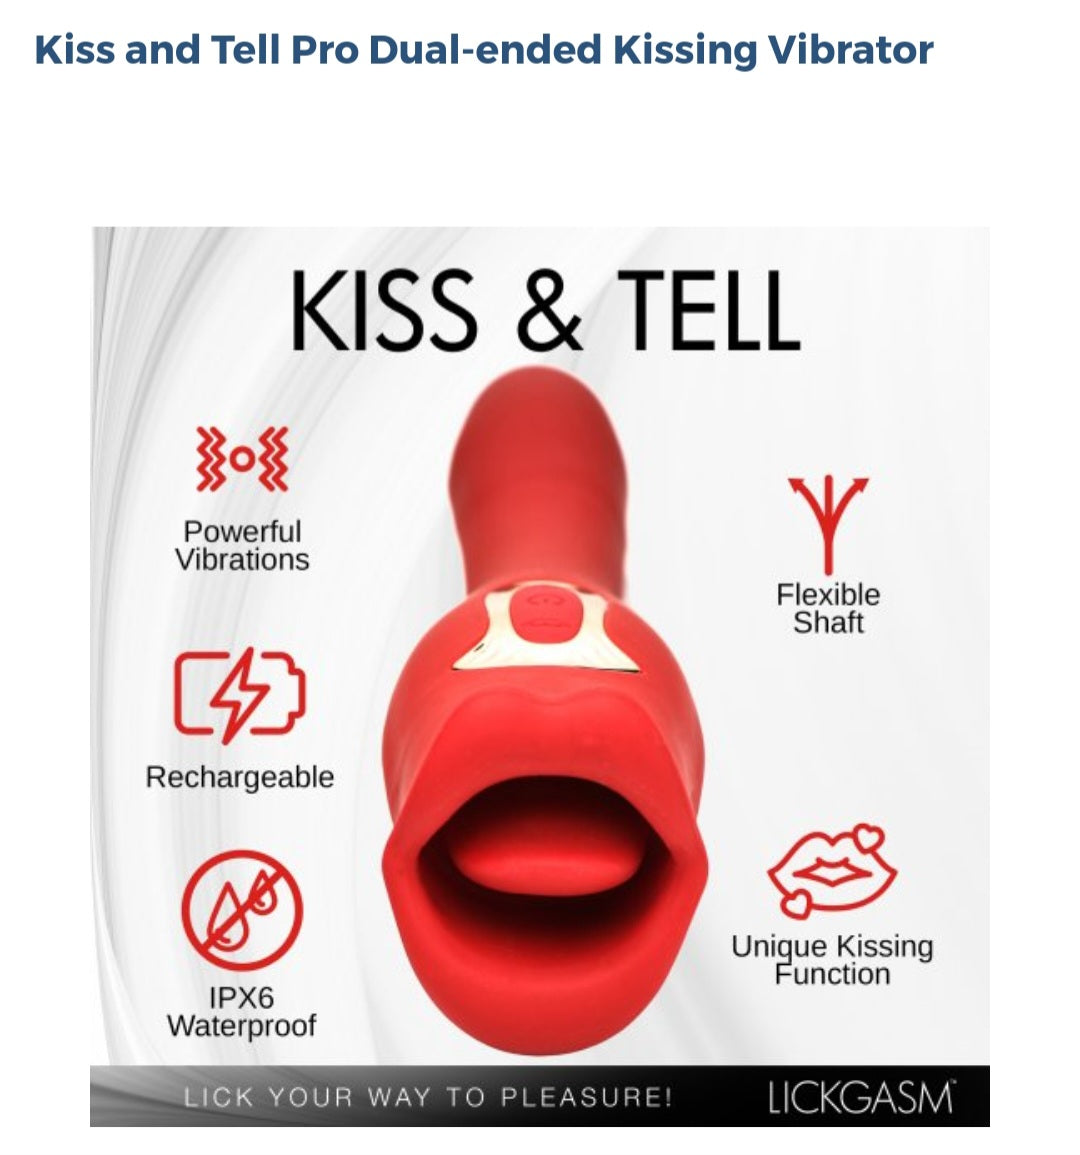 Kiss And Tell Pro Dual-Ended Kissing Vibrator